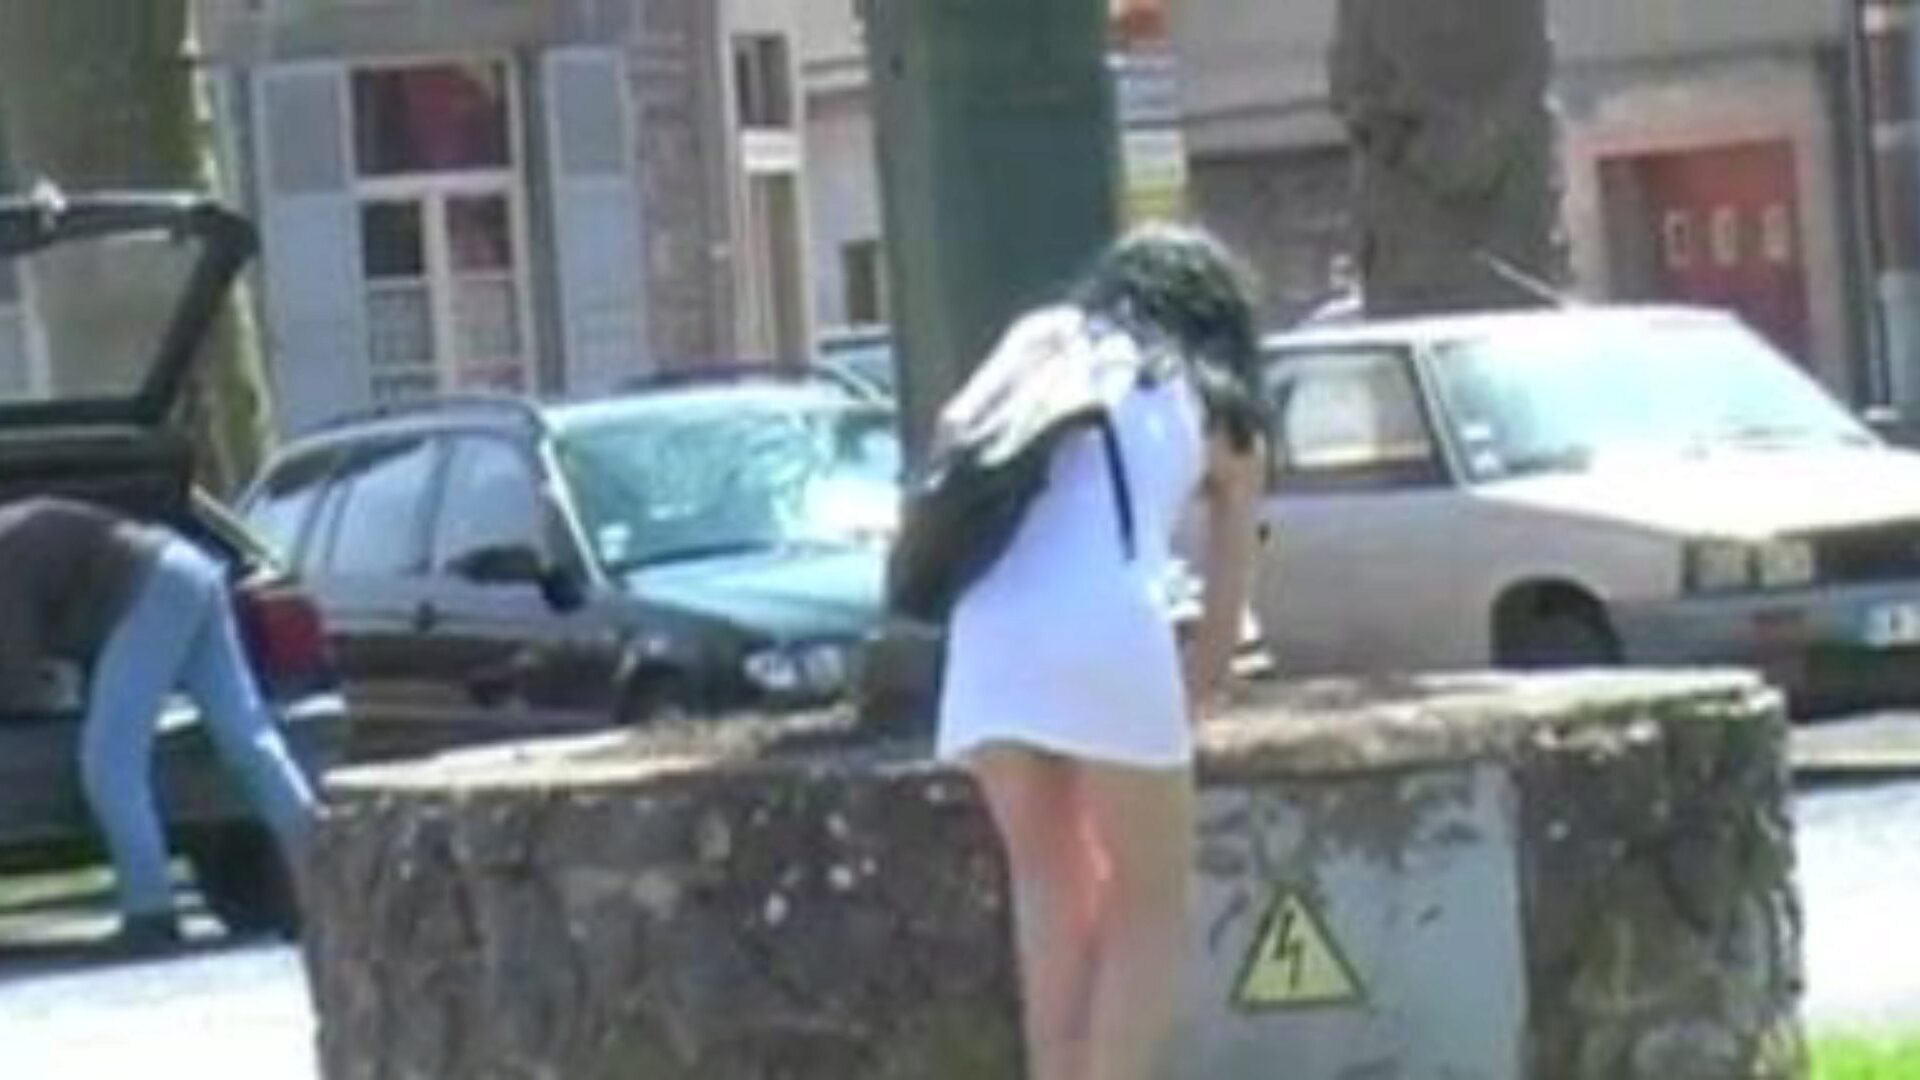 Monica Exhibee Et Baisee En Public, Free Porn 5b: xHamster Watch Monica Exhibee Et Baisee En Public episode on xHamster, the giant sex tube web site with tons of free French Public Blowjob & Outdoor Sex pornography vids